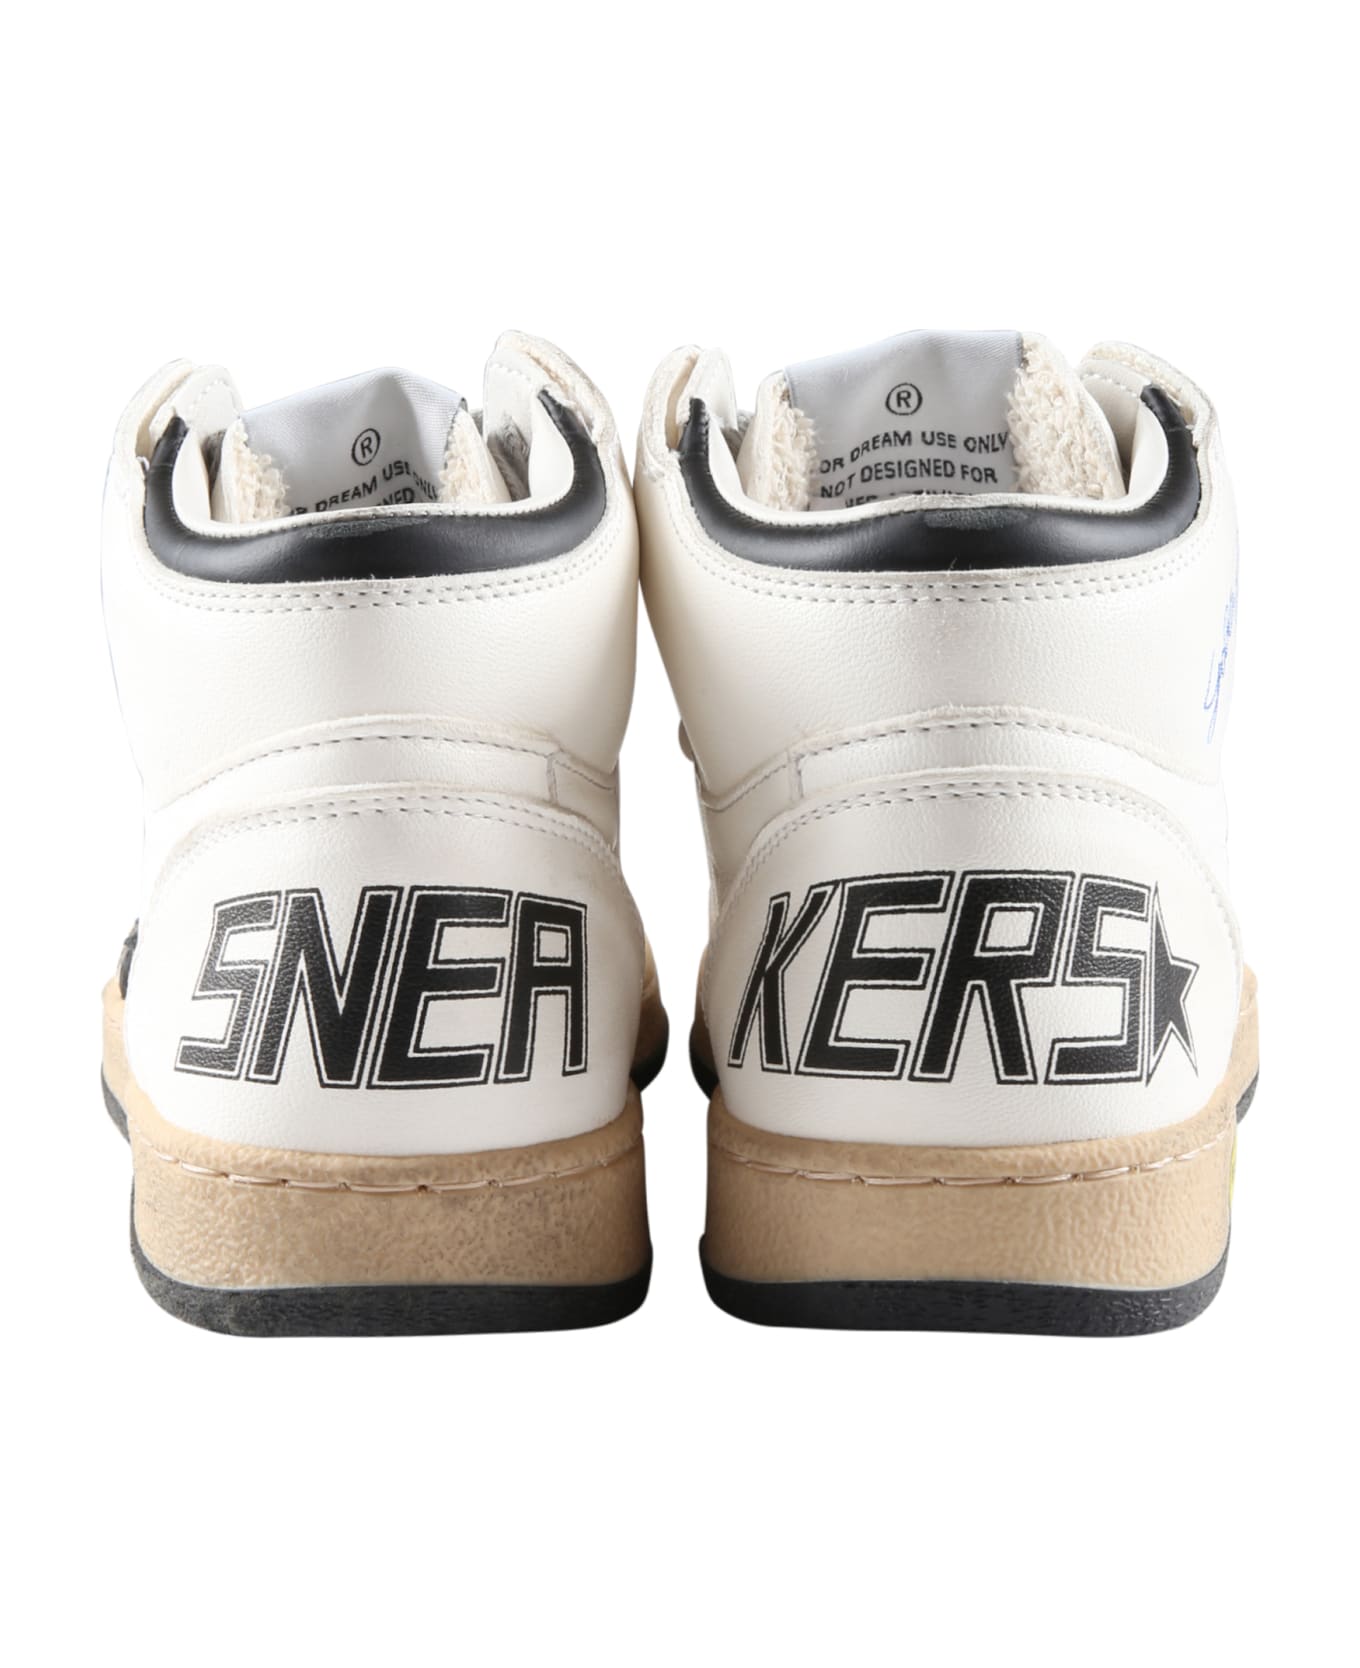 Golden Goose White Sneakers For Boy With Star And Logo - White